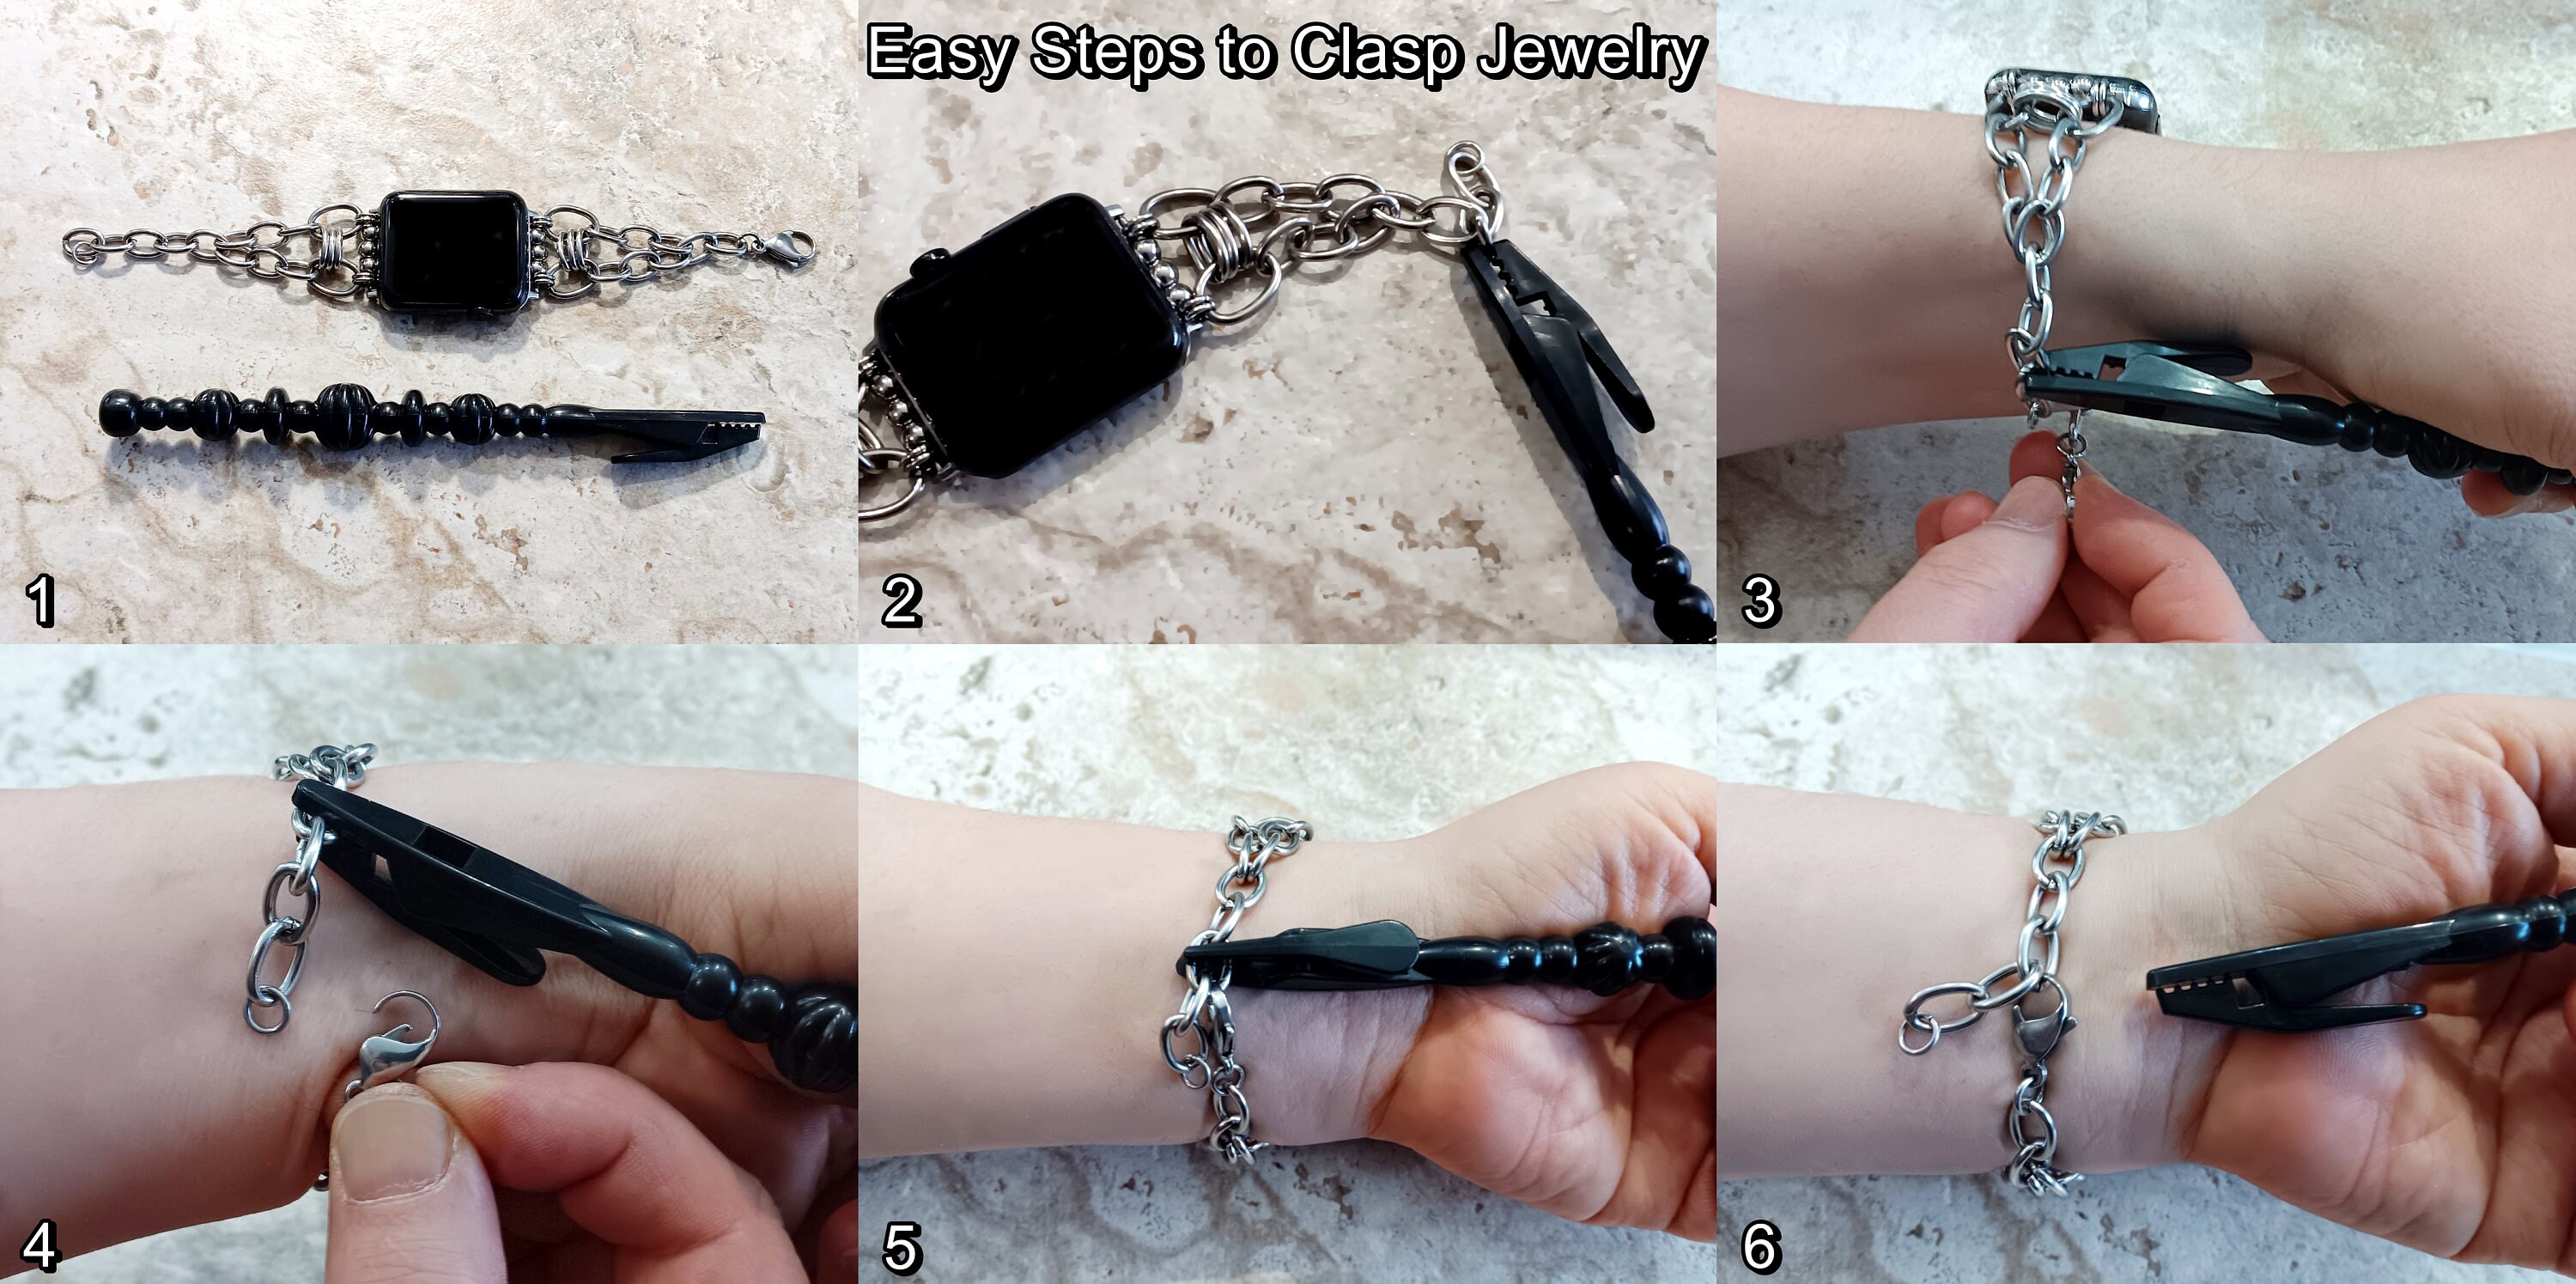 What is the best way to put on a necklace that has a small clasp that is  difficult to get on or off? - Quora